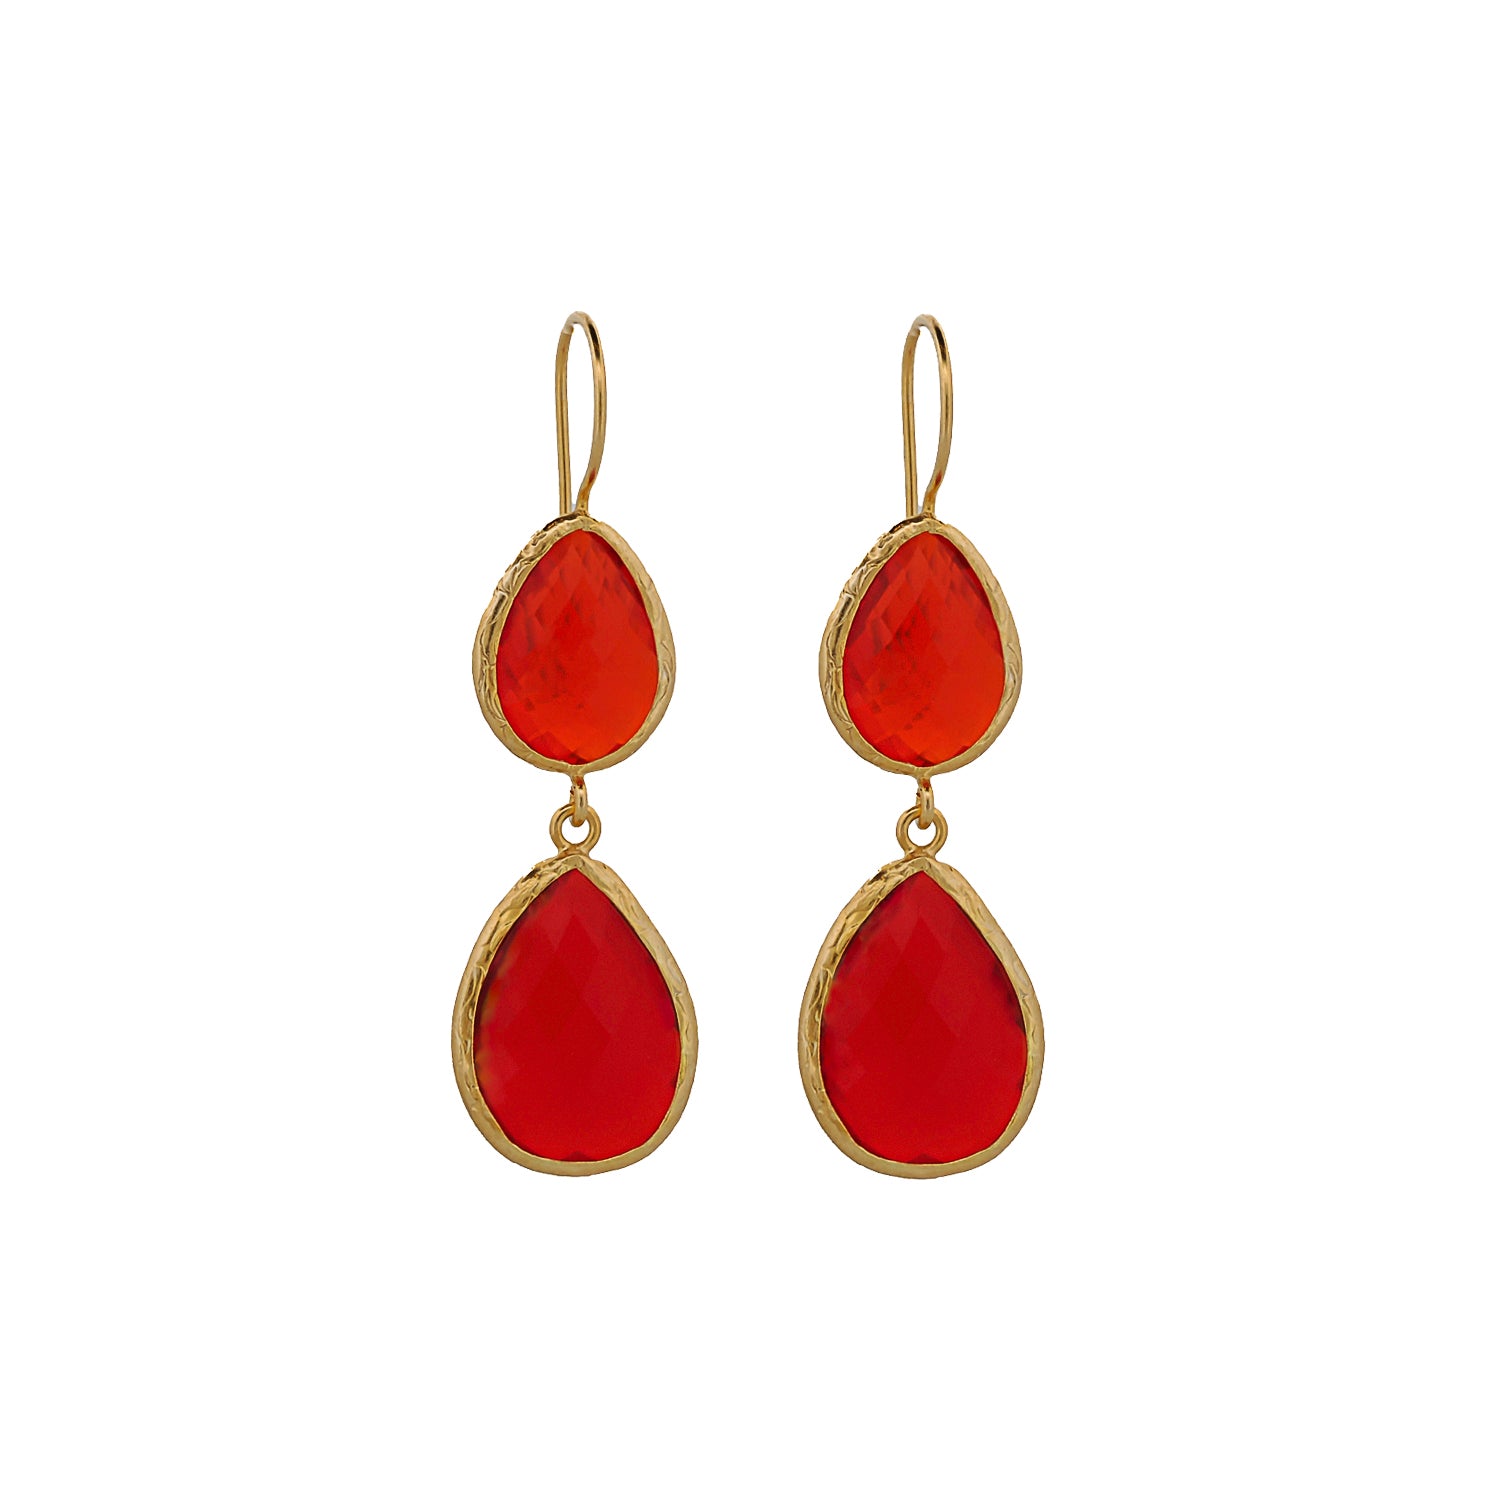 Joyful Simplicity: Red Crystal Adorned Earrings for a Stylish New Year Look